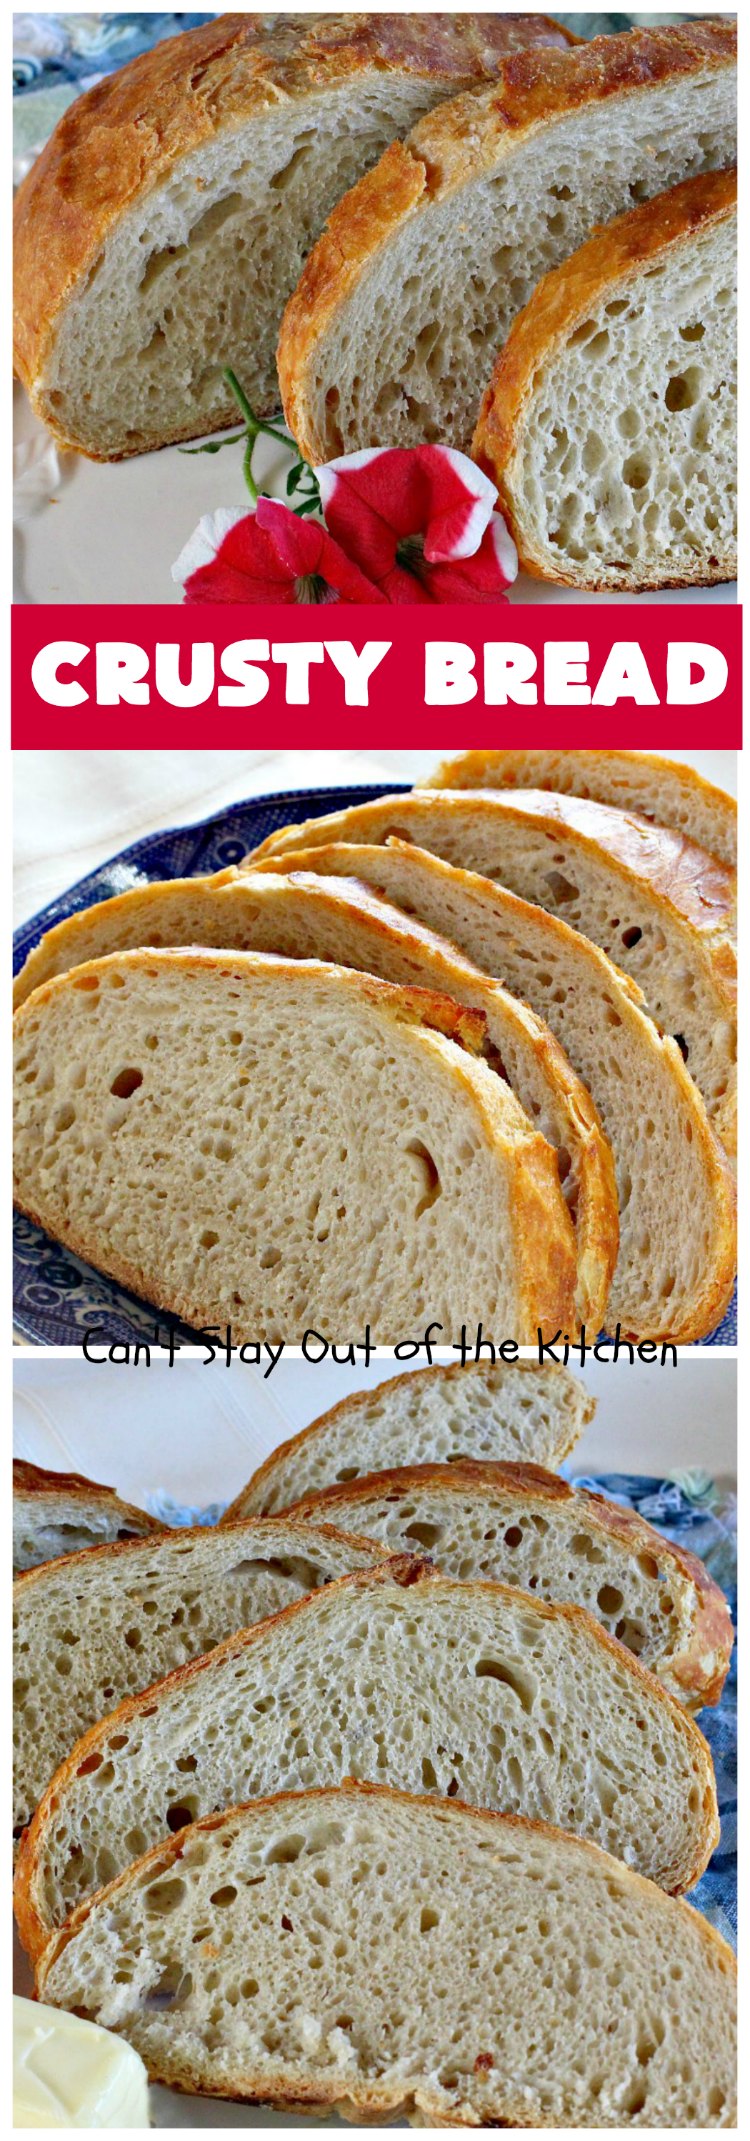 Crusty Bread | Can't Stay Out of the Kitchen